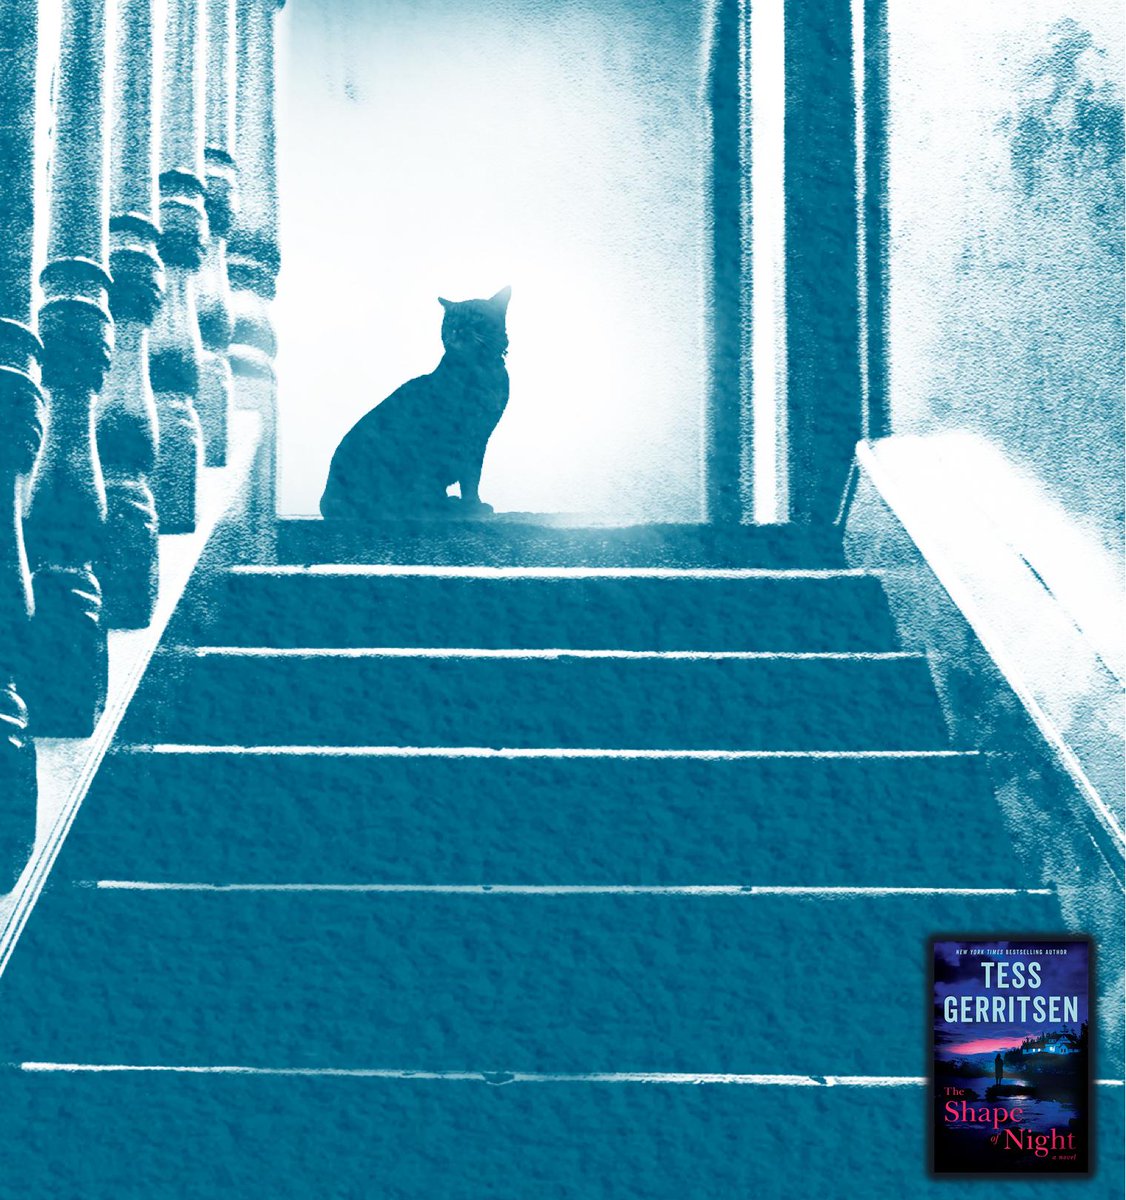 To honor the lovable and mean coon cat Hannibal in ‘The Shape of Night,’ I'm donating $5000 to animal shelters. 

Want $500 for a shelter in your name? Retweet to enter (and for a bonus entry, reply with your favorite shelter's name or a photo of YOUR cat!) #HannibalTheCat